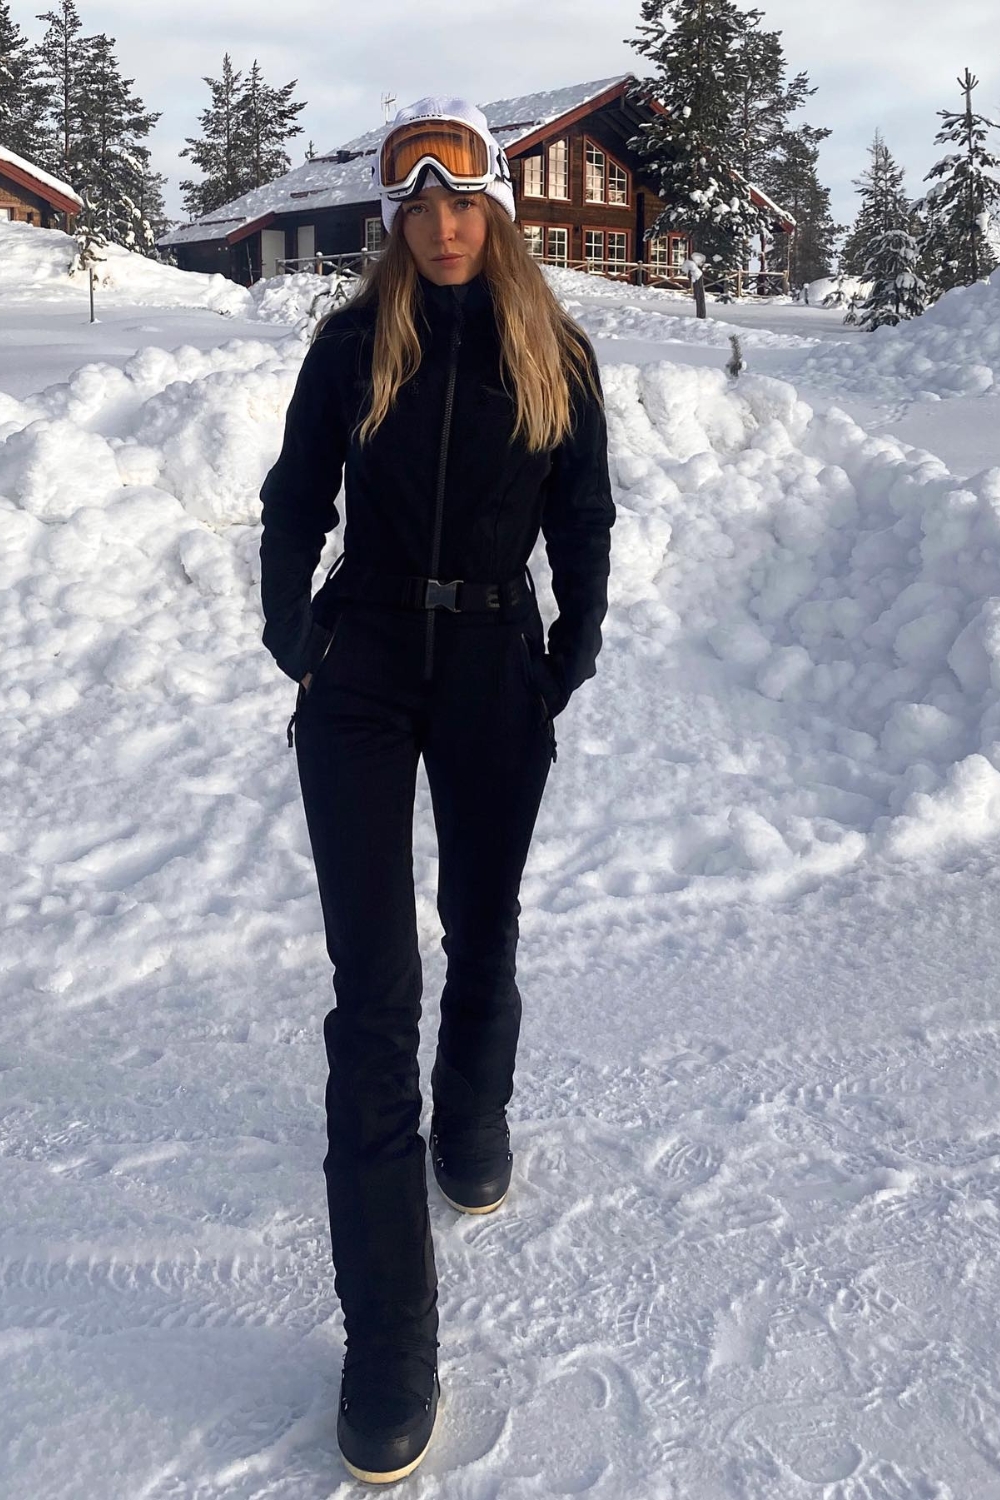 Ski Outfit Ideas - All Black Ski Suit And Snow Boots